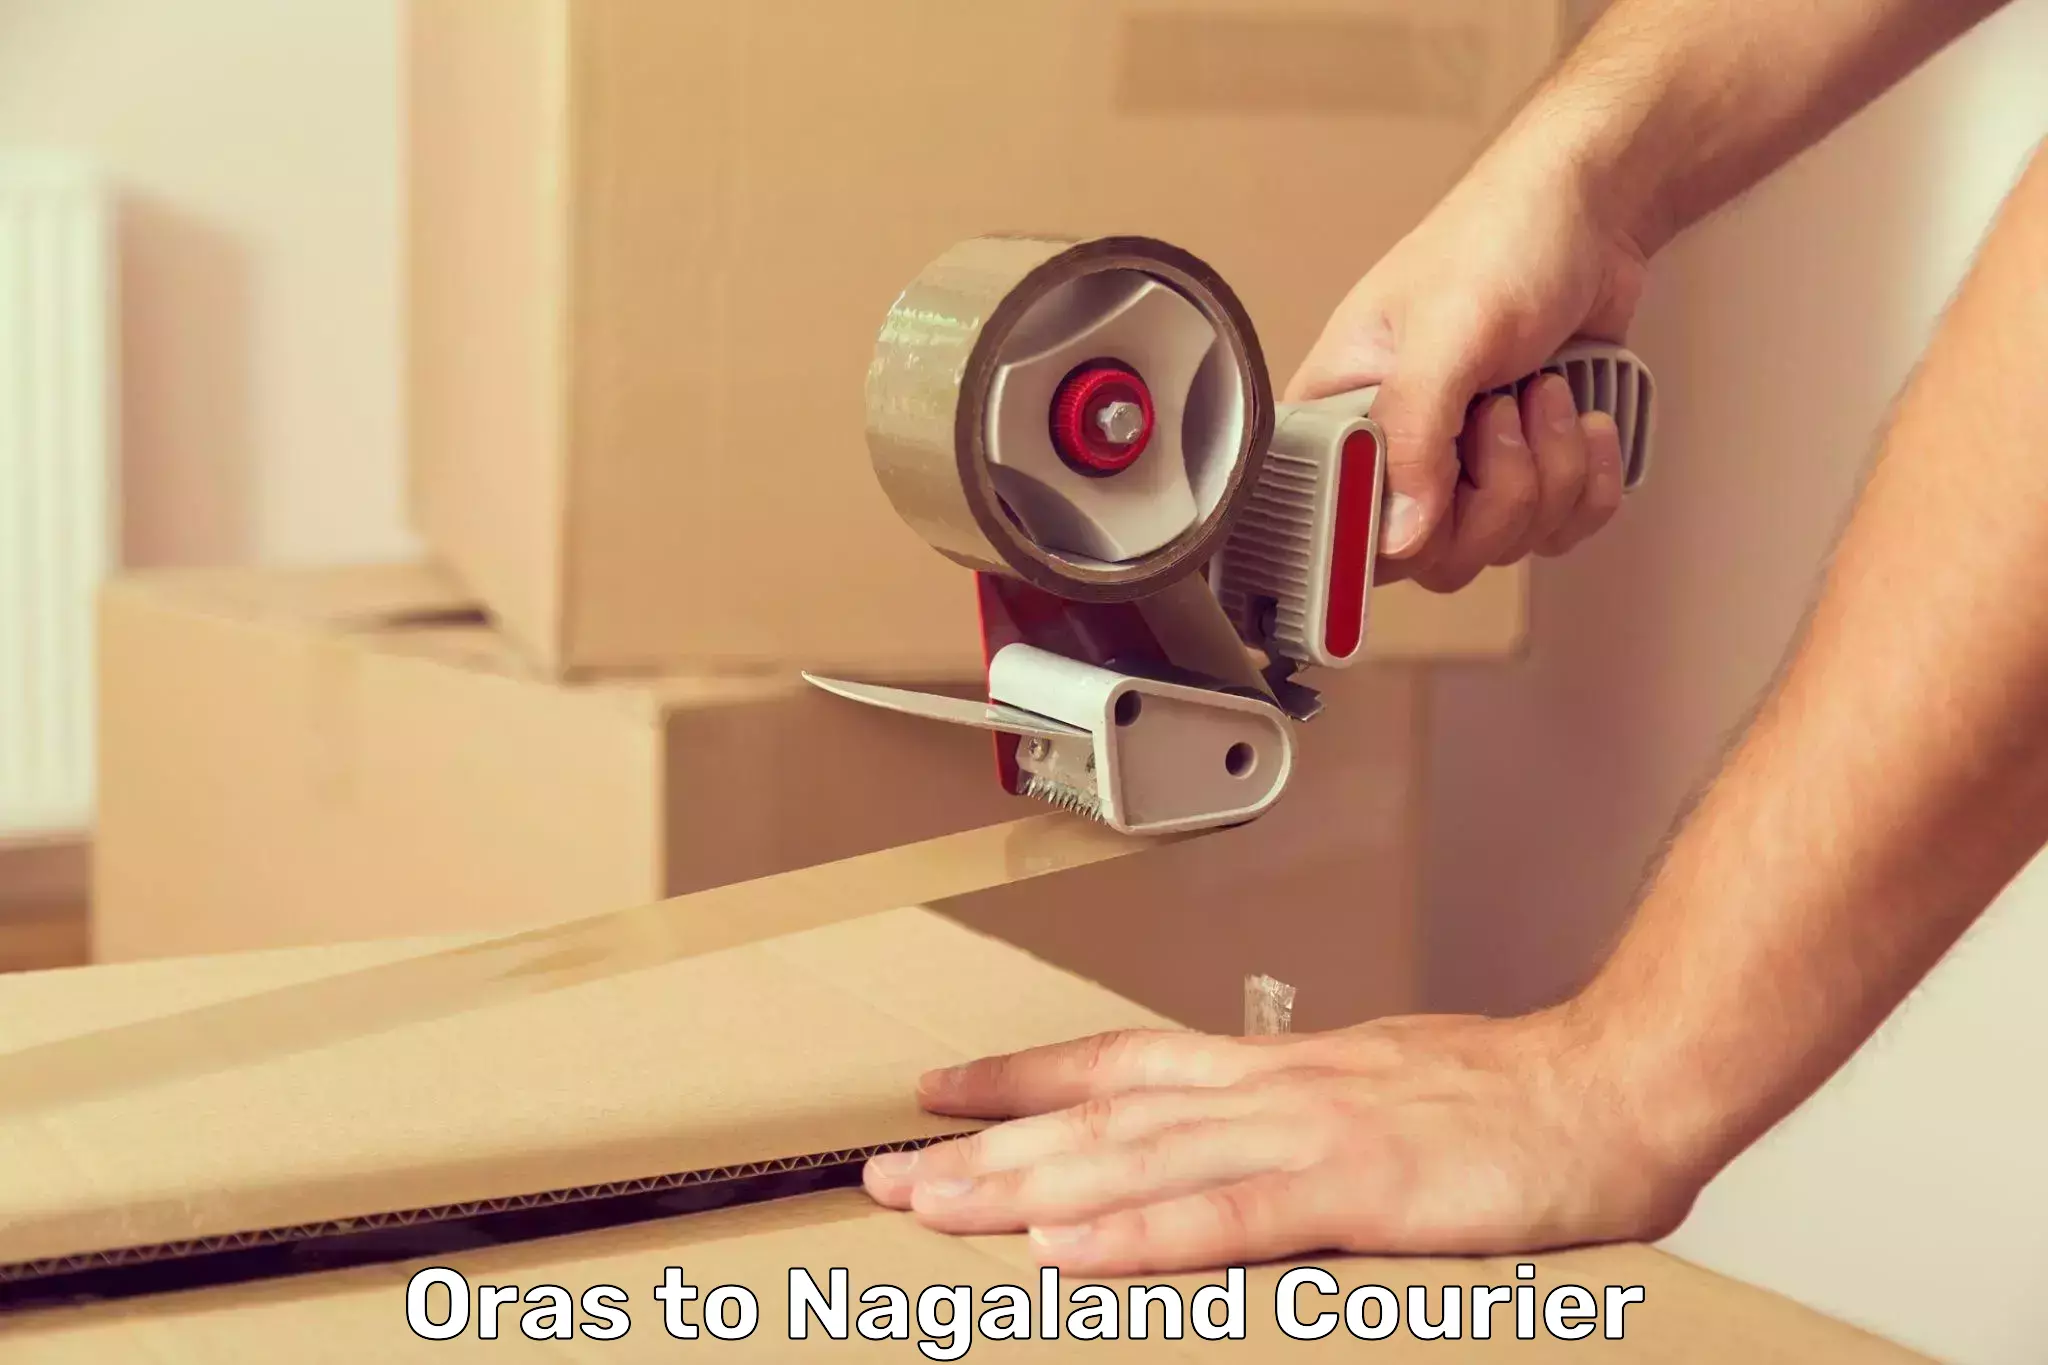 Courier insurance in Oras to Nagaland